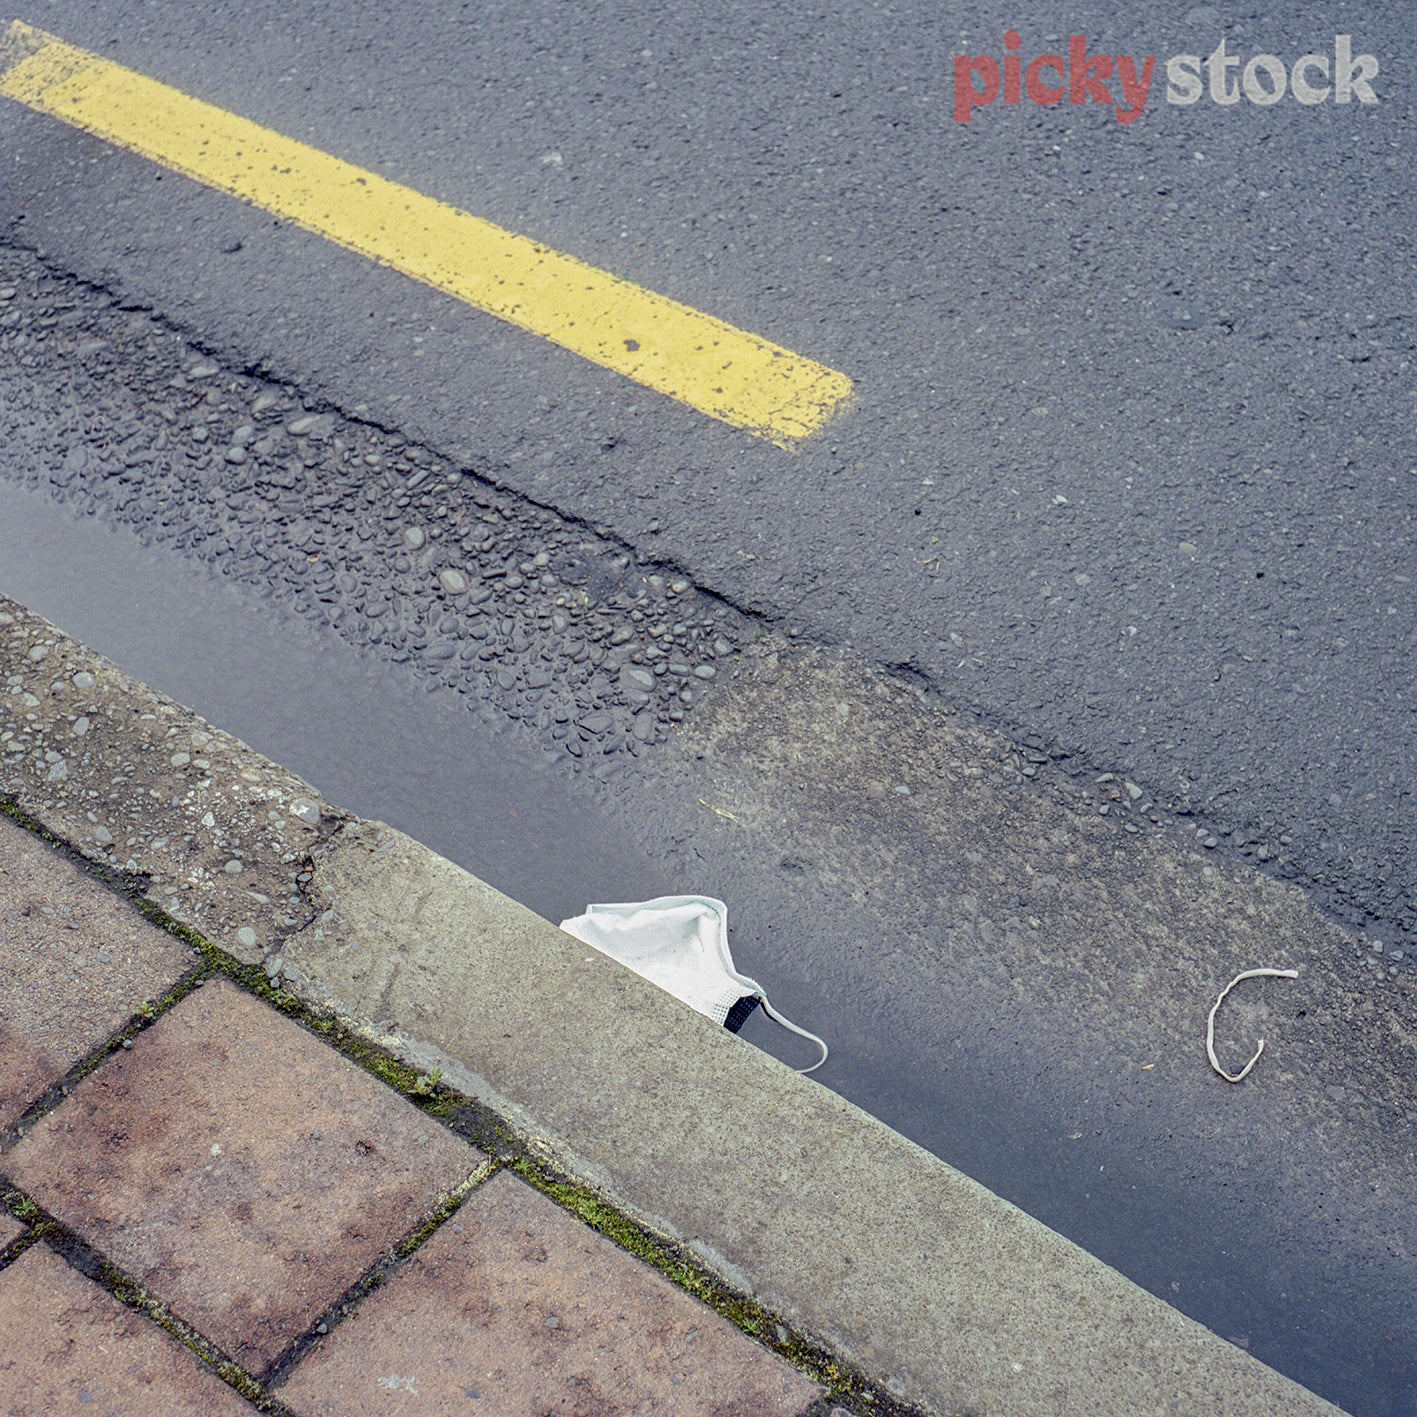 Surgical mask dropped on road. Mask in wet gutter, on road. Yellow road marking line also visible. 